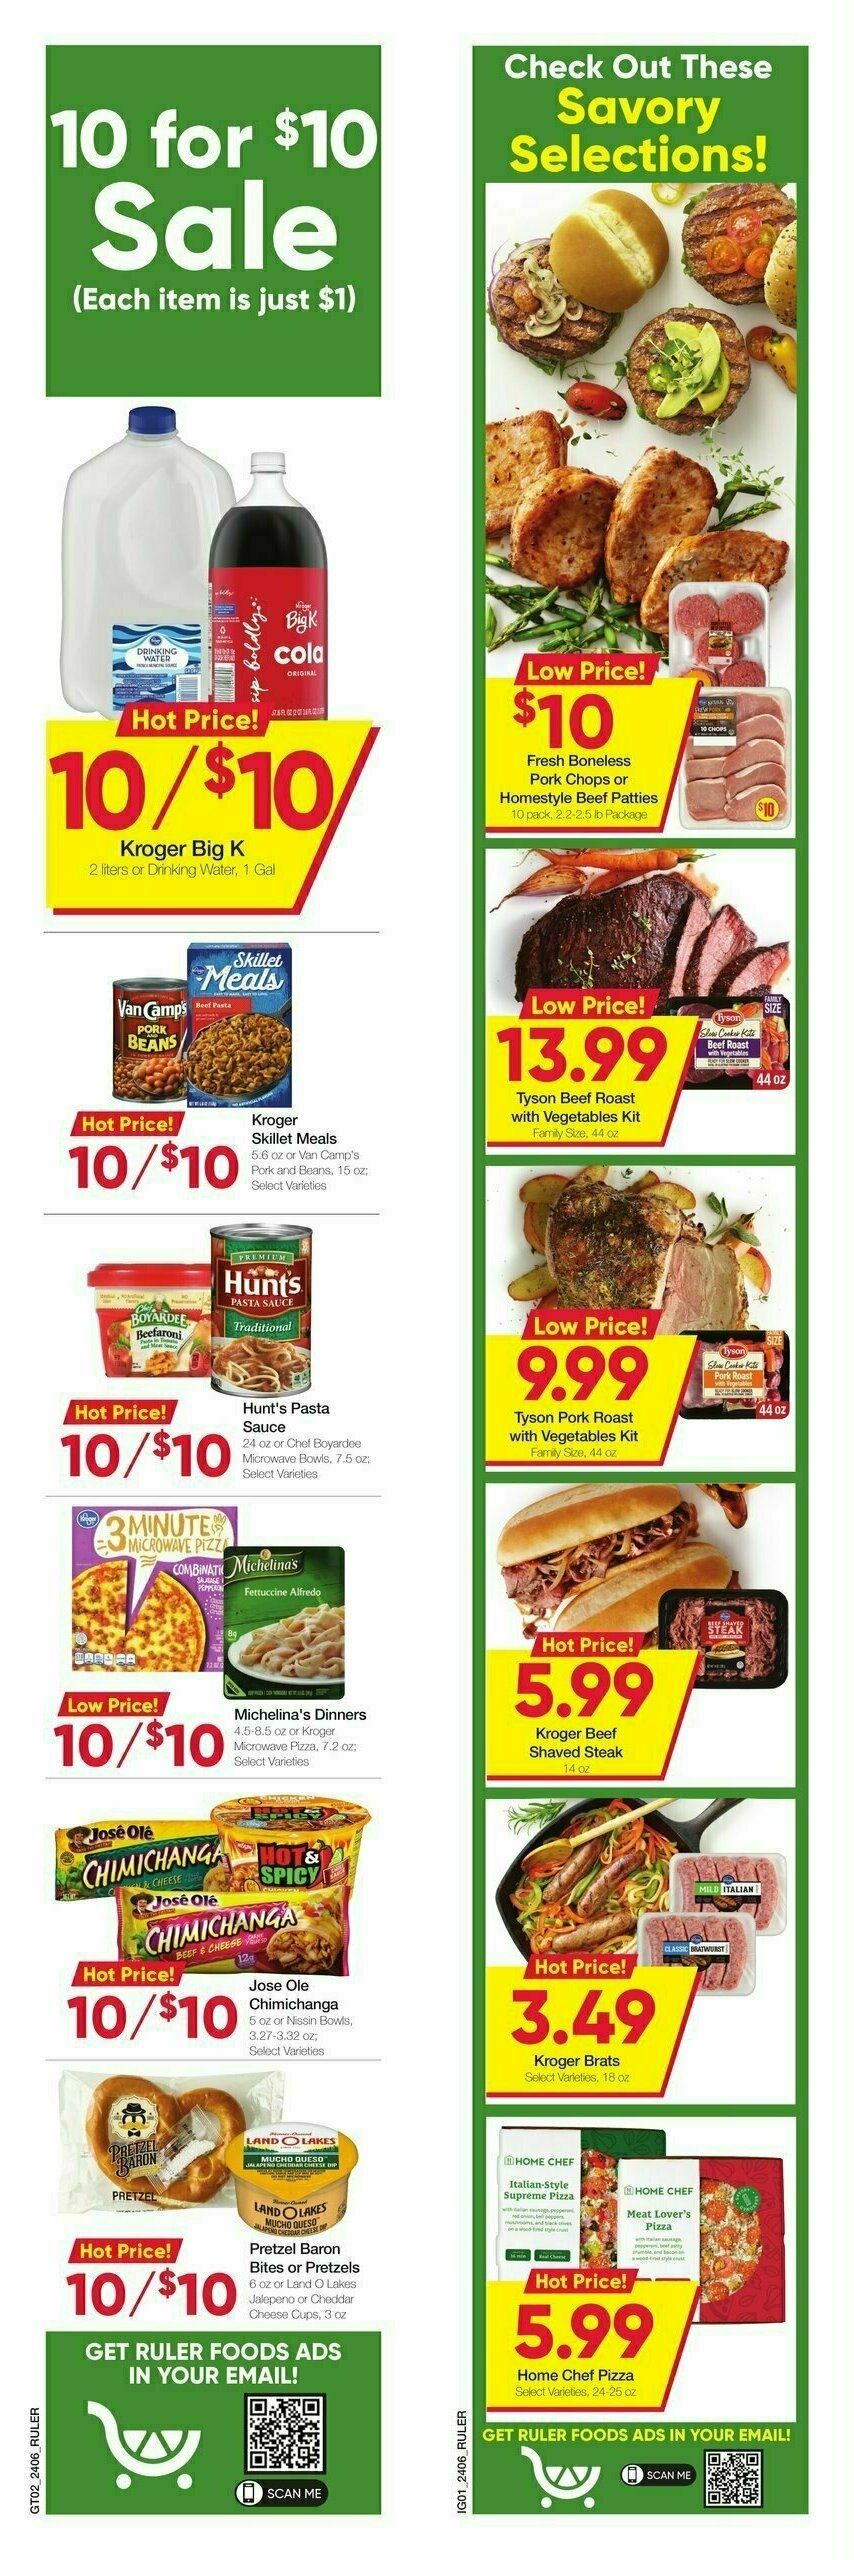 Ruler Foods Weekly Ad from March 13